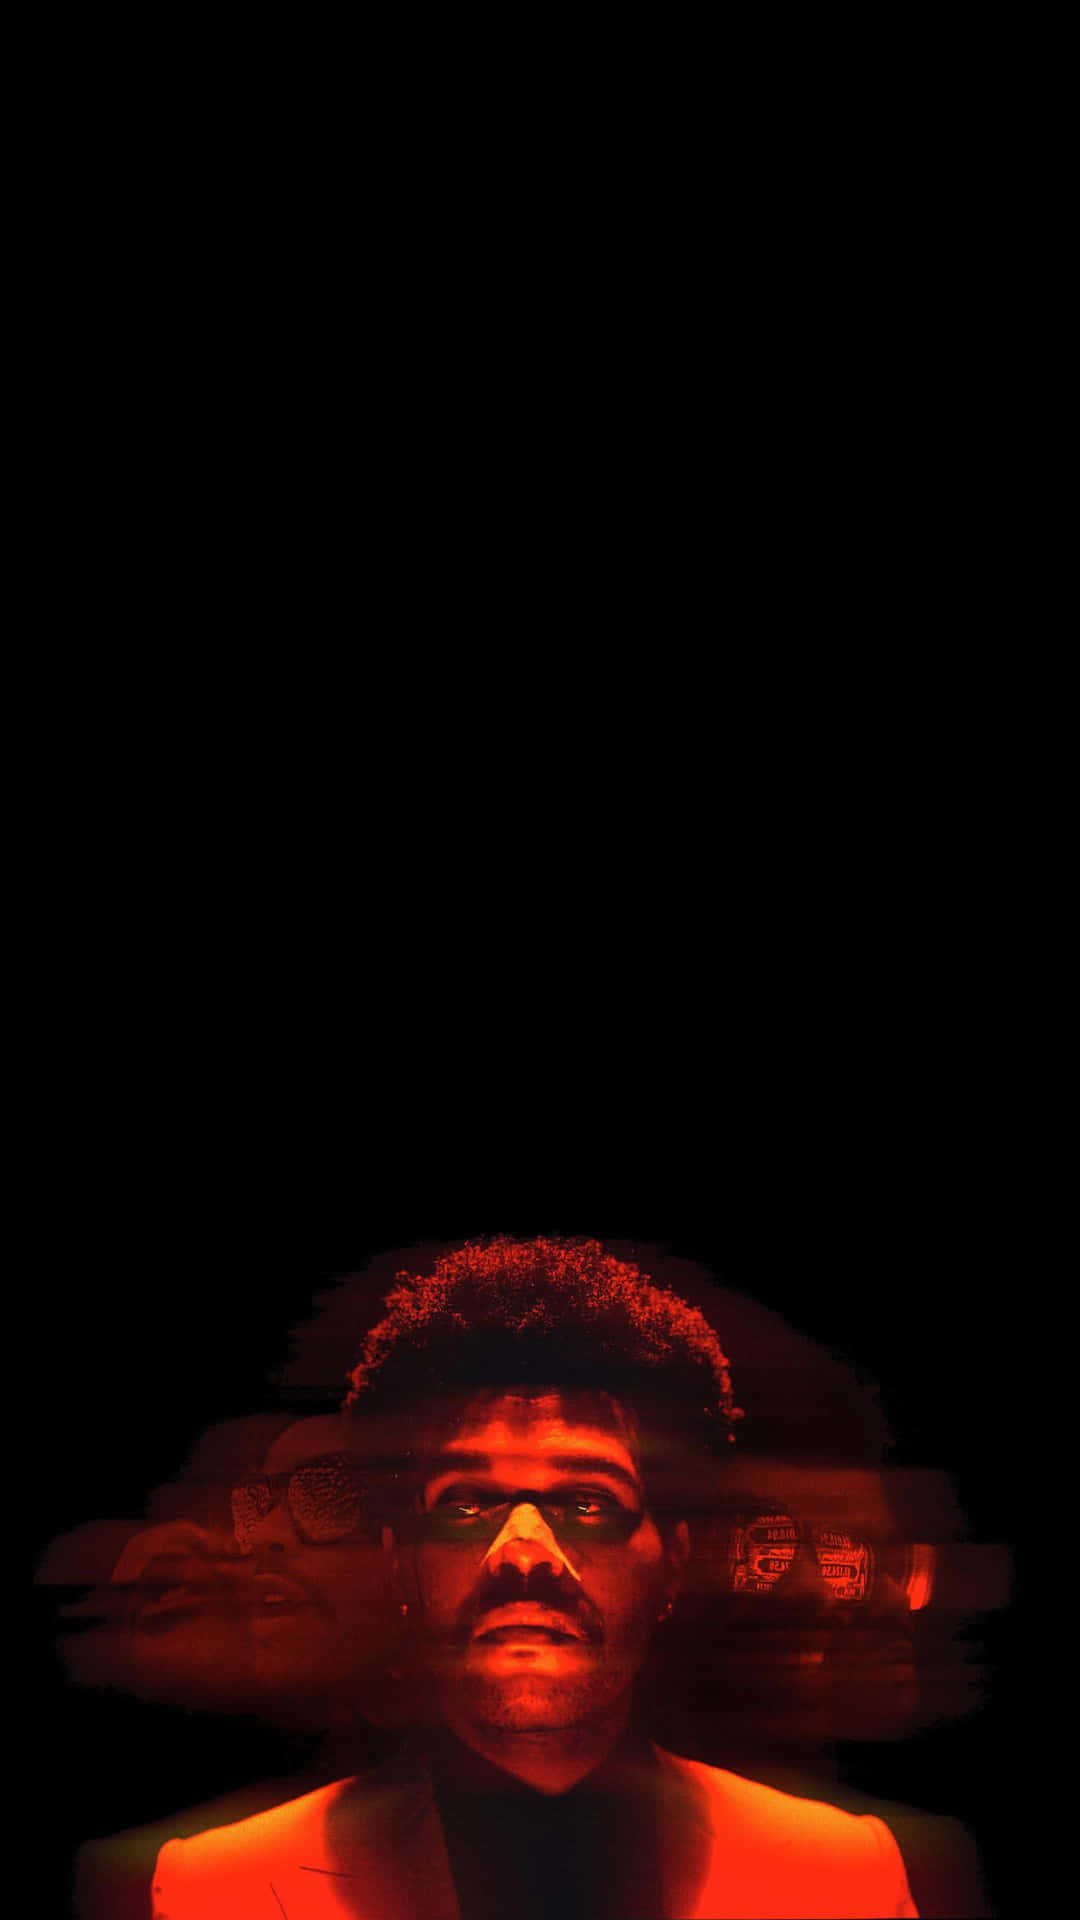 The Weeknd in 'After Hours', Red Neon Lights Wallpaper